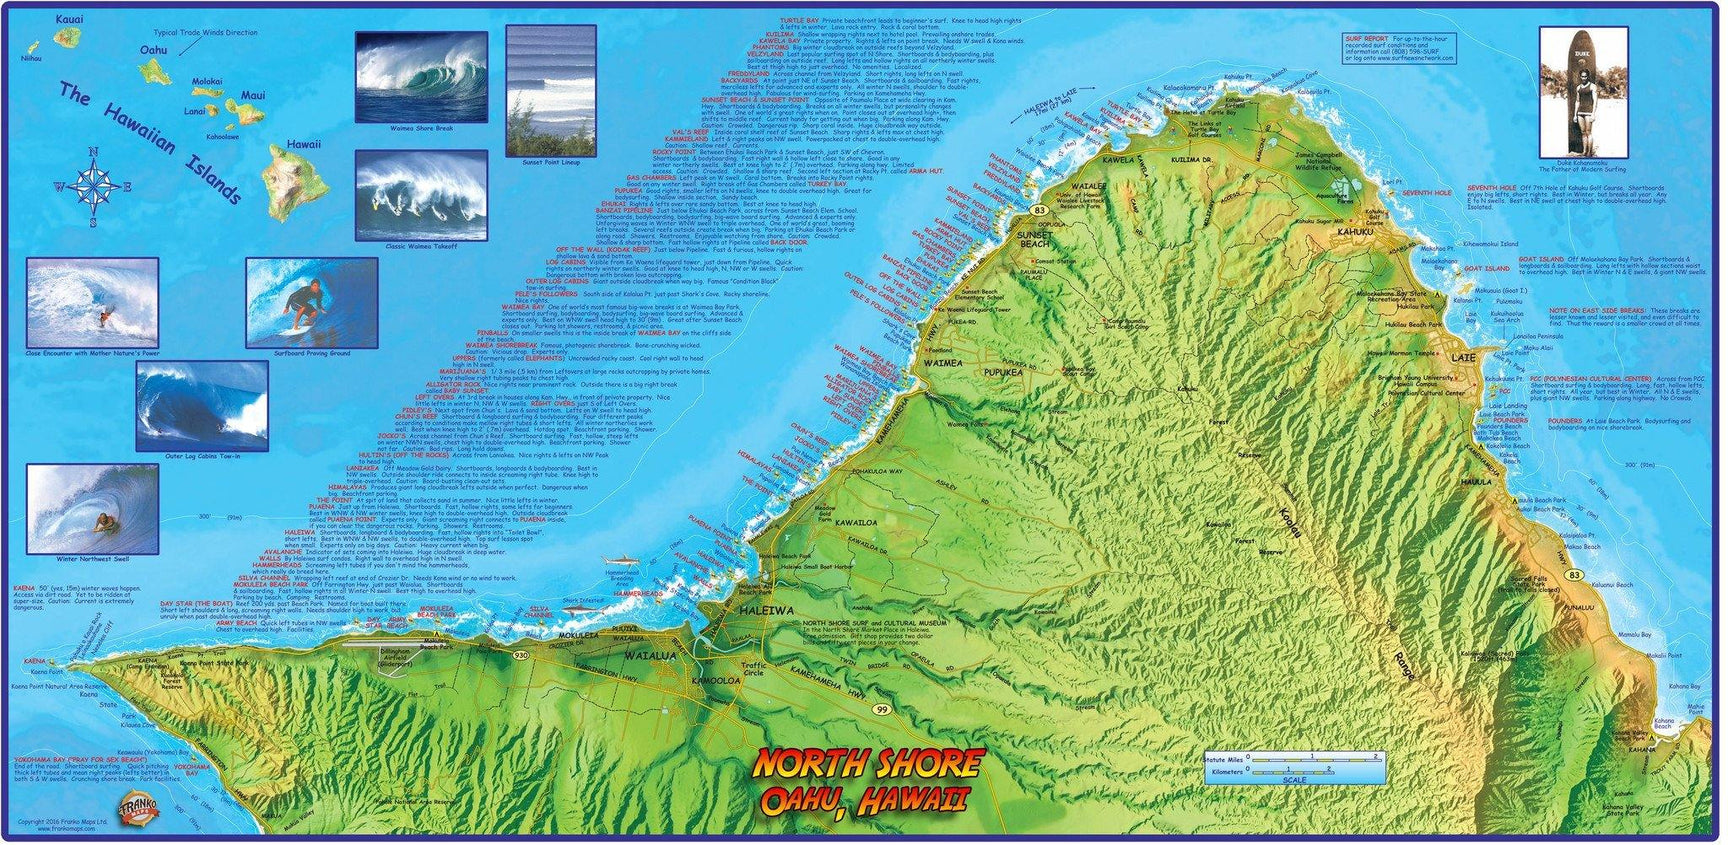 Oahu North Shore Surfing Map Poster Franko Maps 